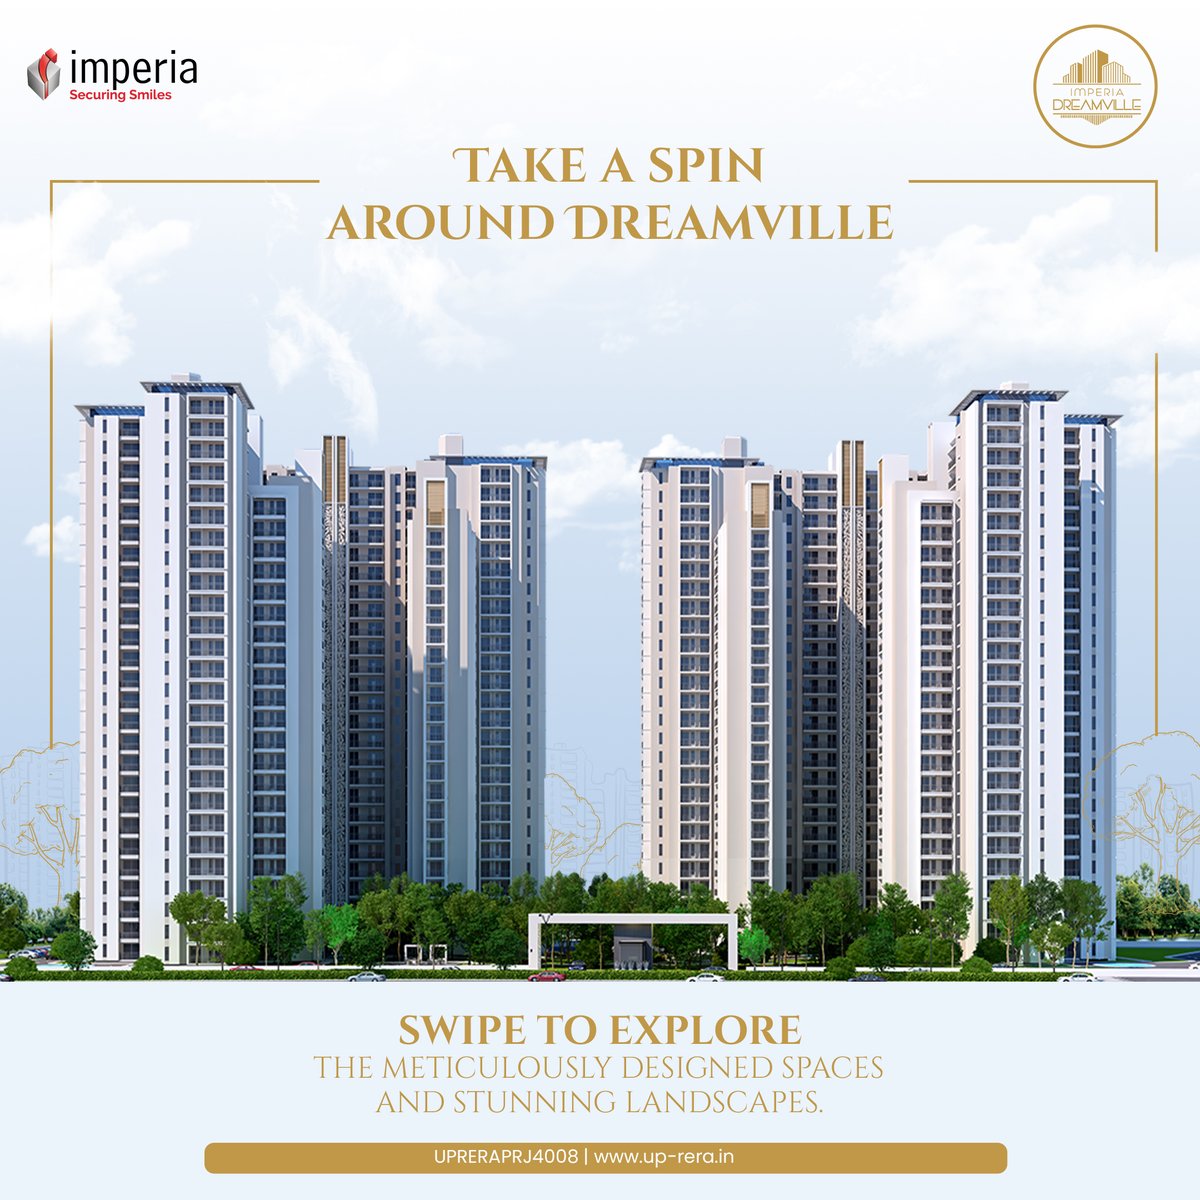 Discover the epitome of luxury living at Imperia Dreamville in Yamuna Expressway. Let your home be a masterpiece that leaves everyone in awe!
#apartmentsingreaternoida #dreamville #imperiadreamville #imperia #imperiahomes #luxuryapartments #residentialapartments #luxuryliving